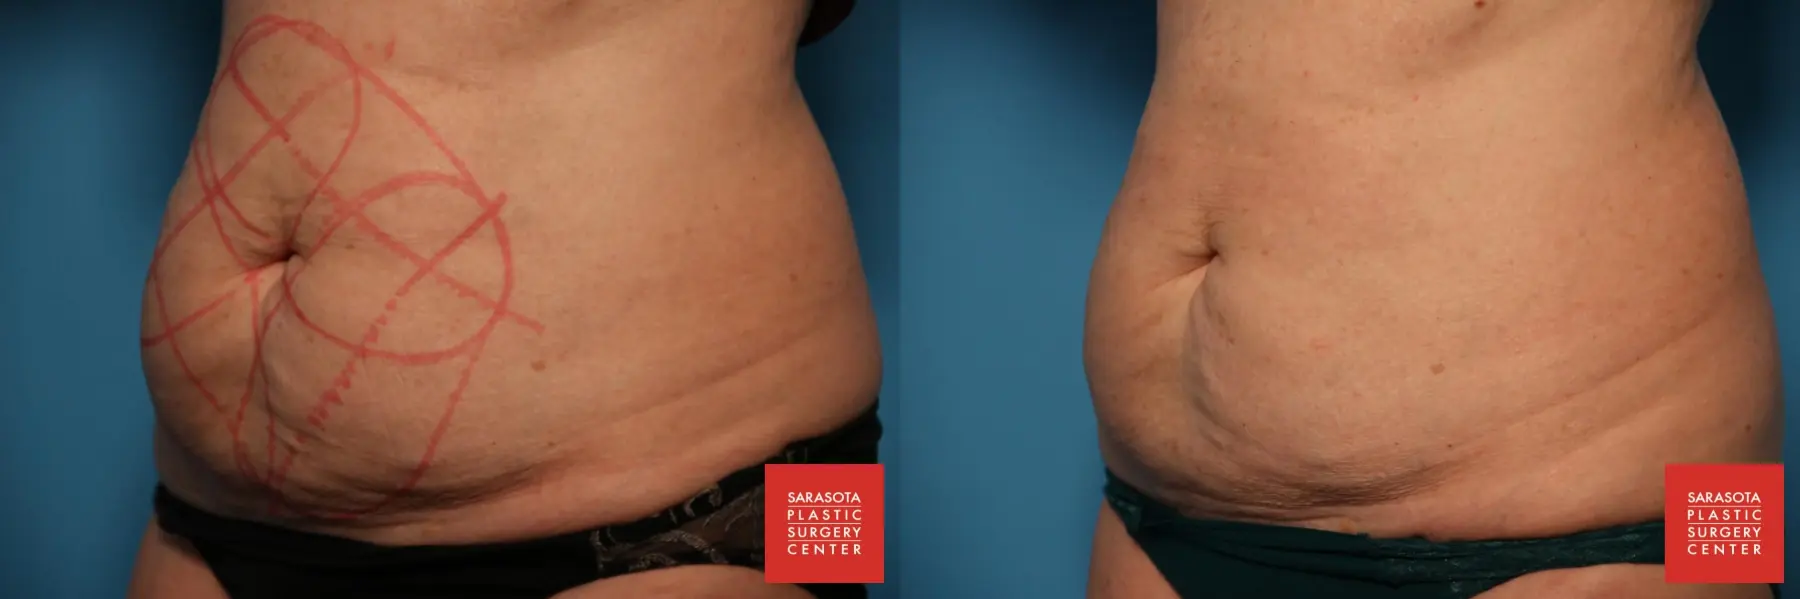 CoolSculpting®: Patient 7 - Before and After 2